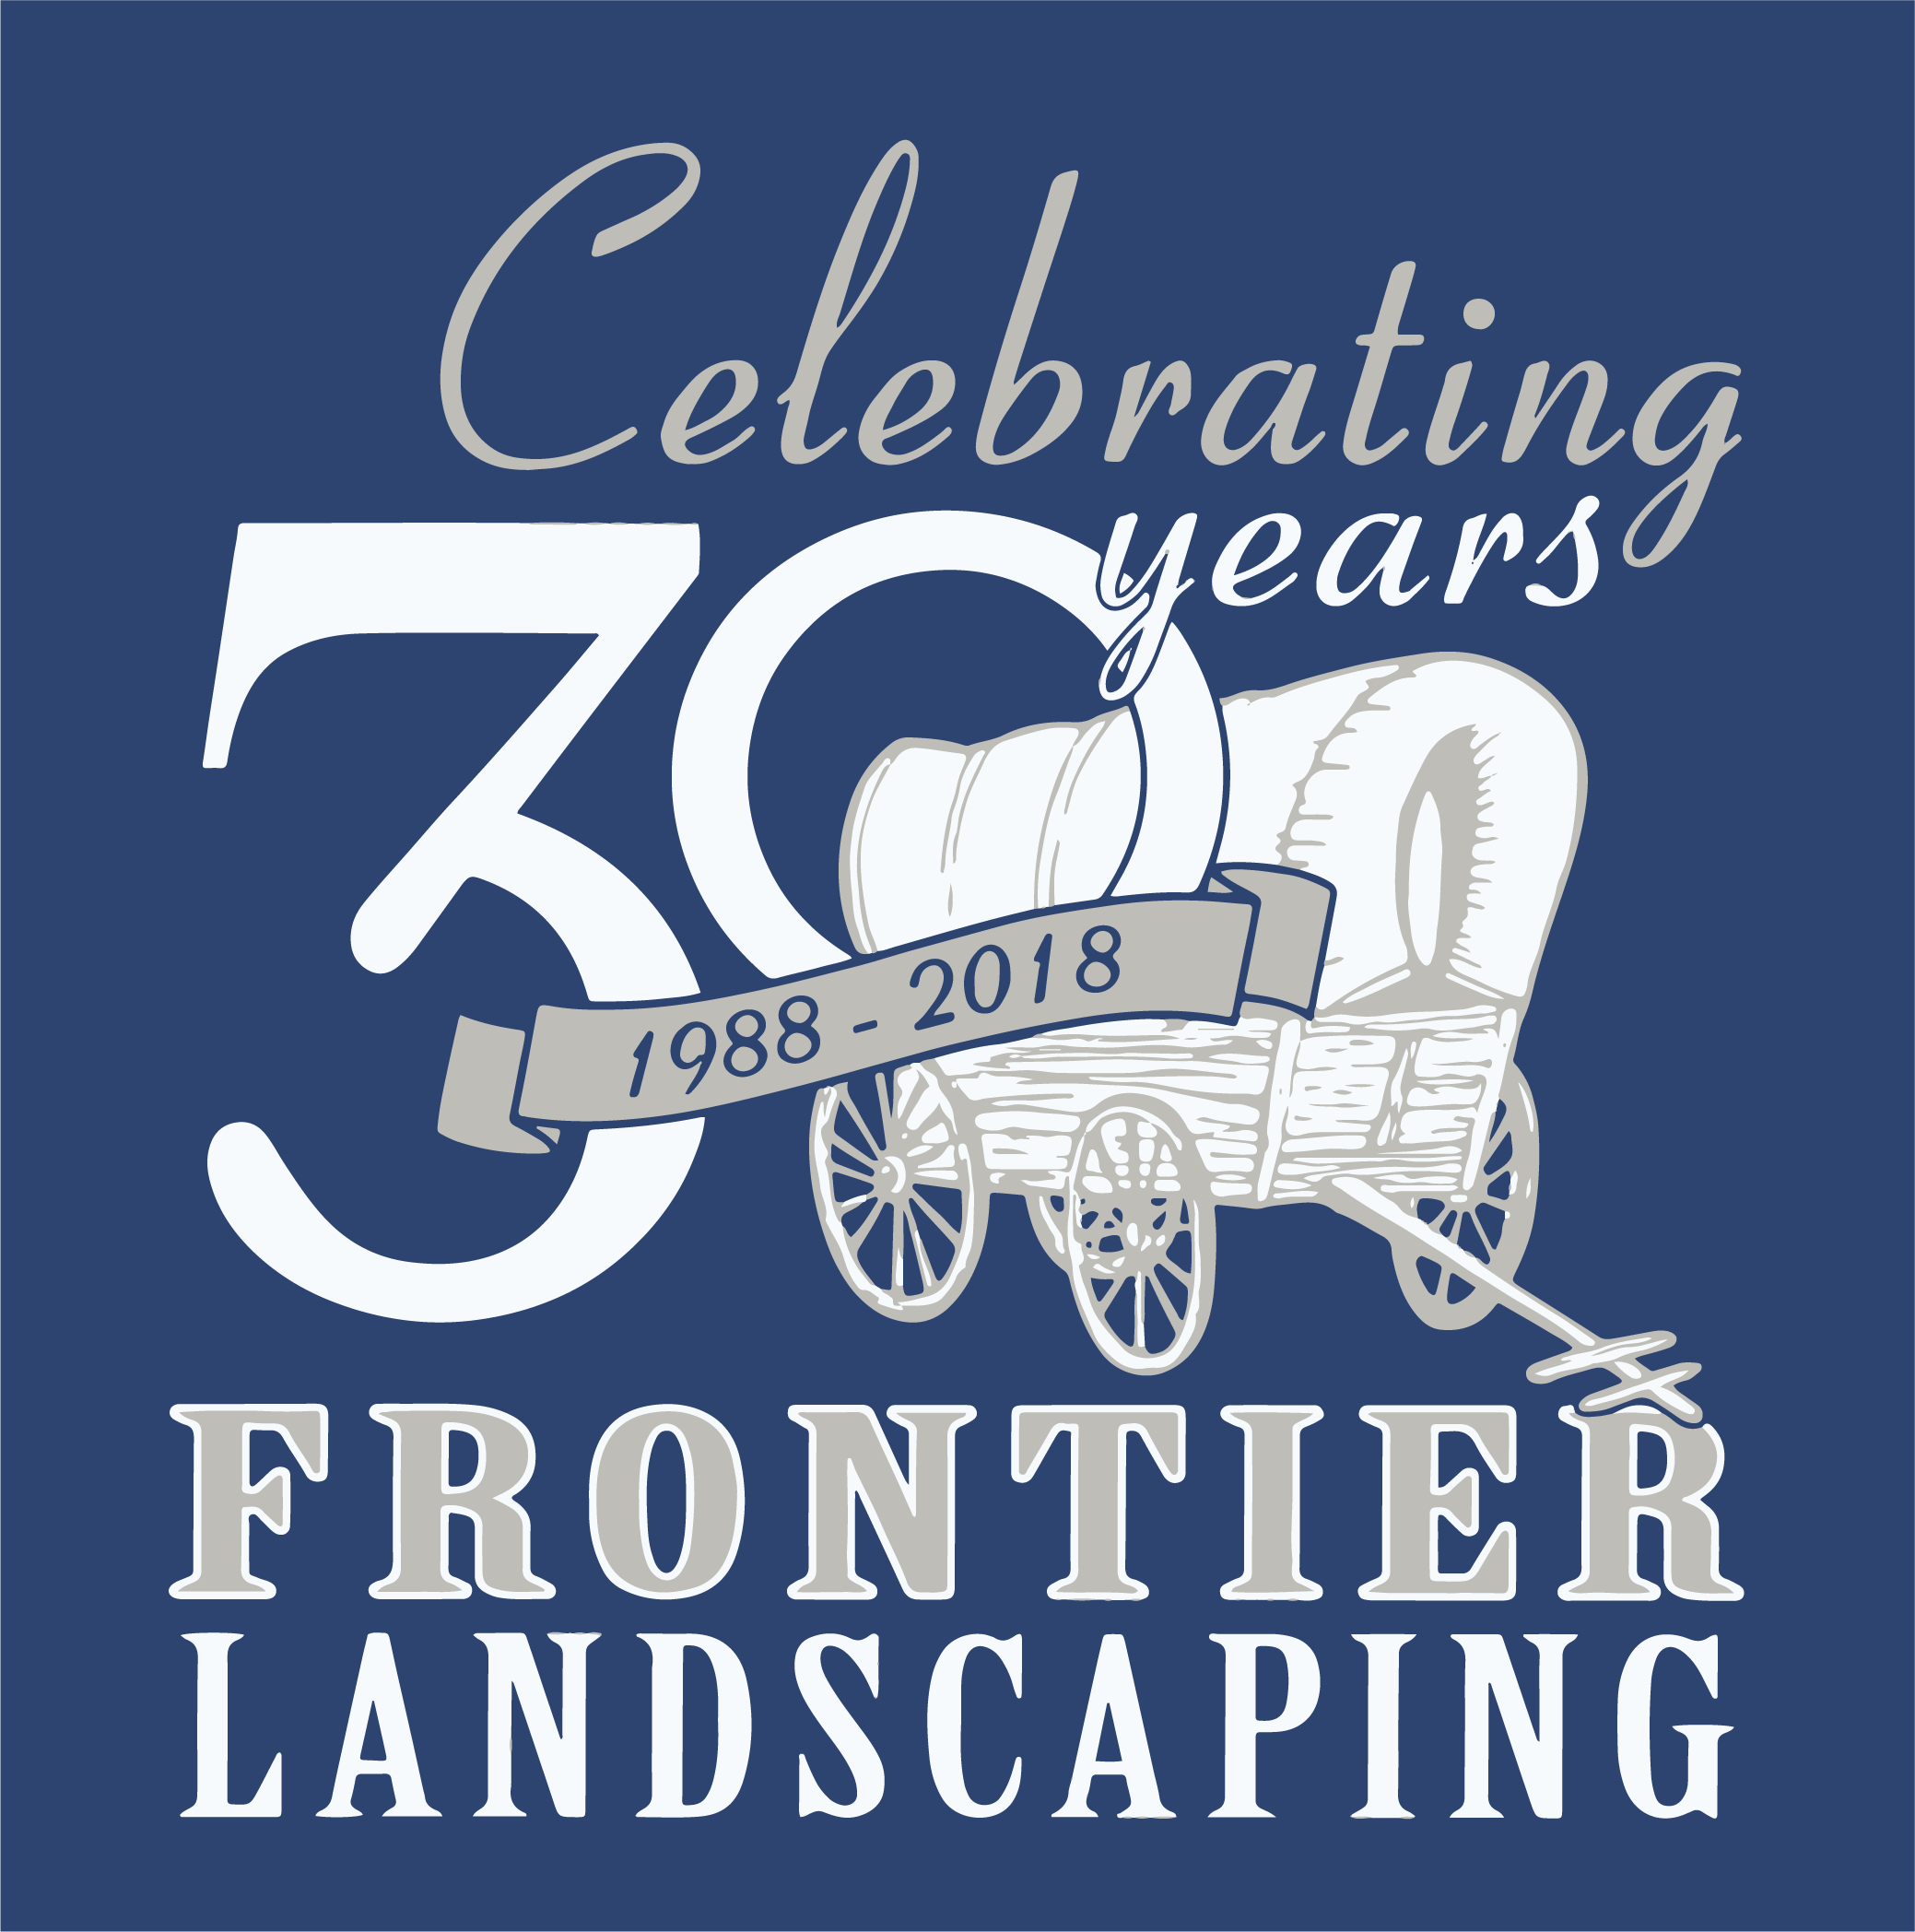 Frontier Tree Services was part of Frontier Landscaping, celebrating 30 years of excellent service!